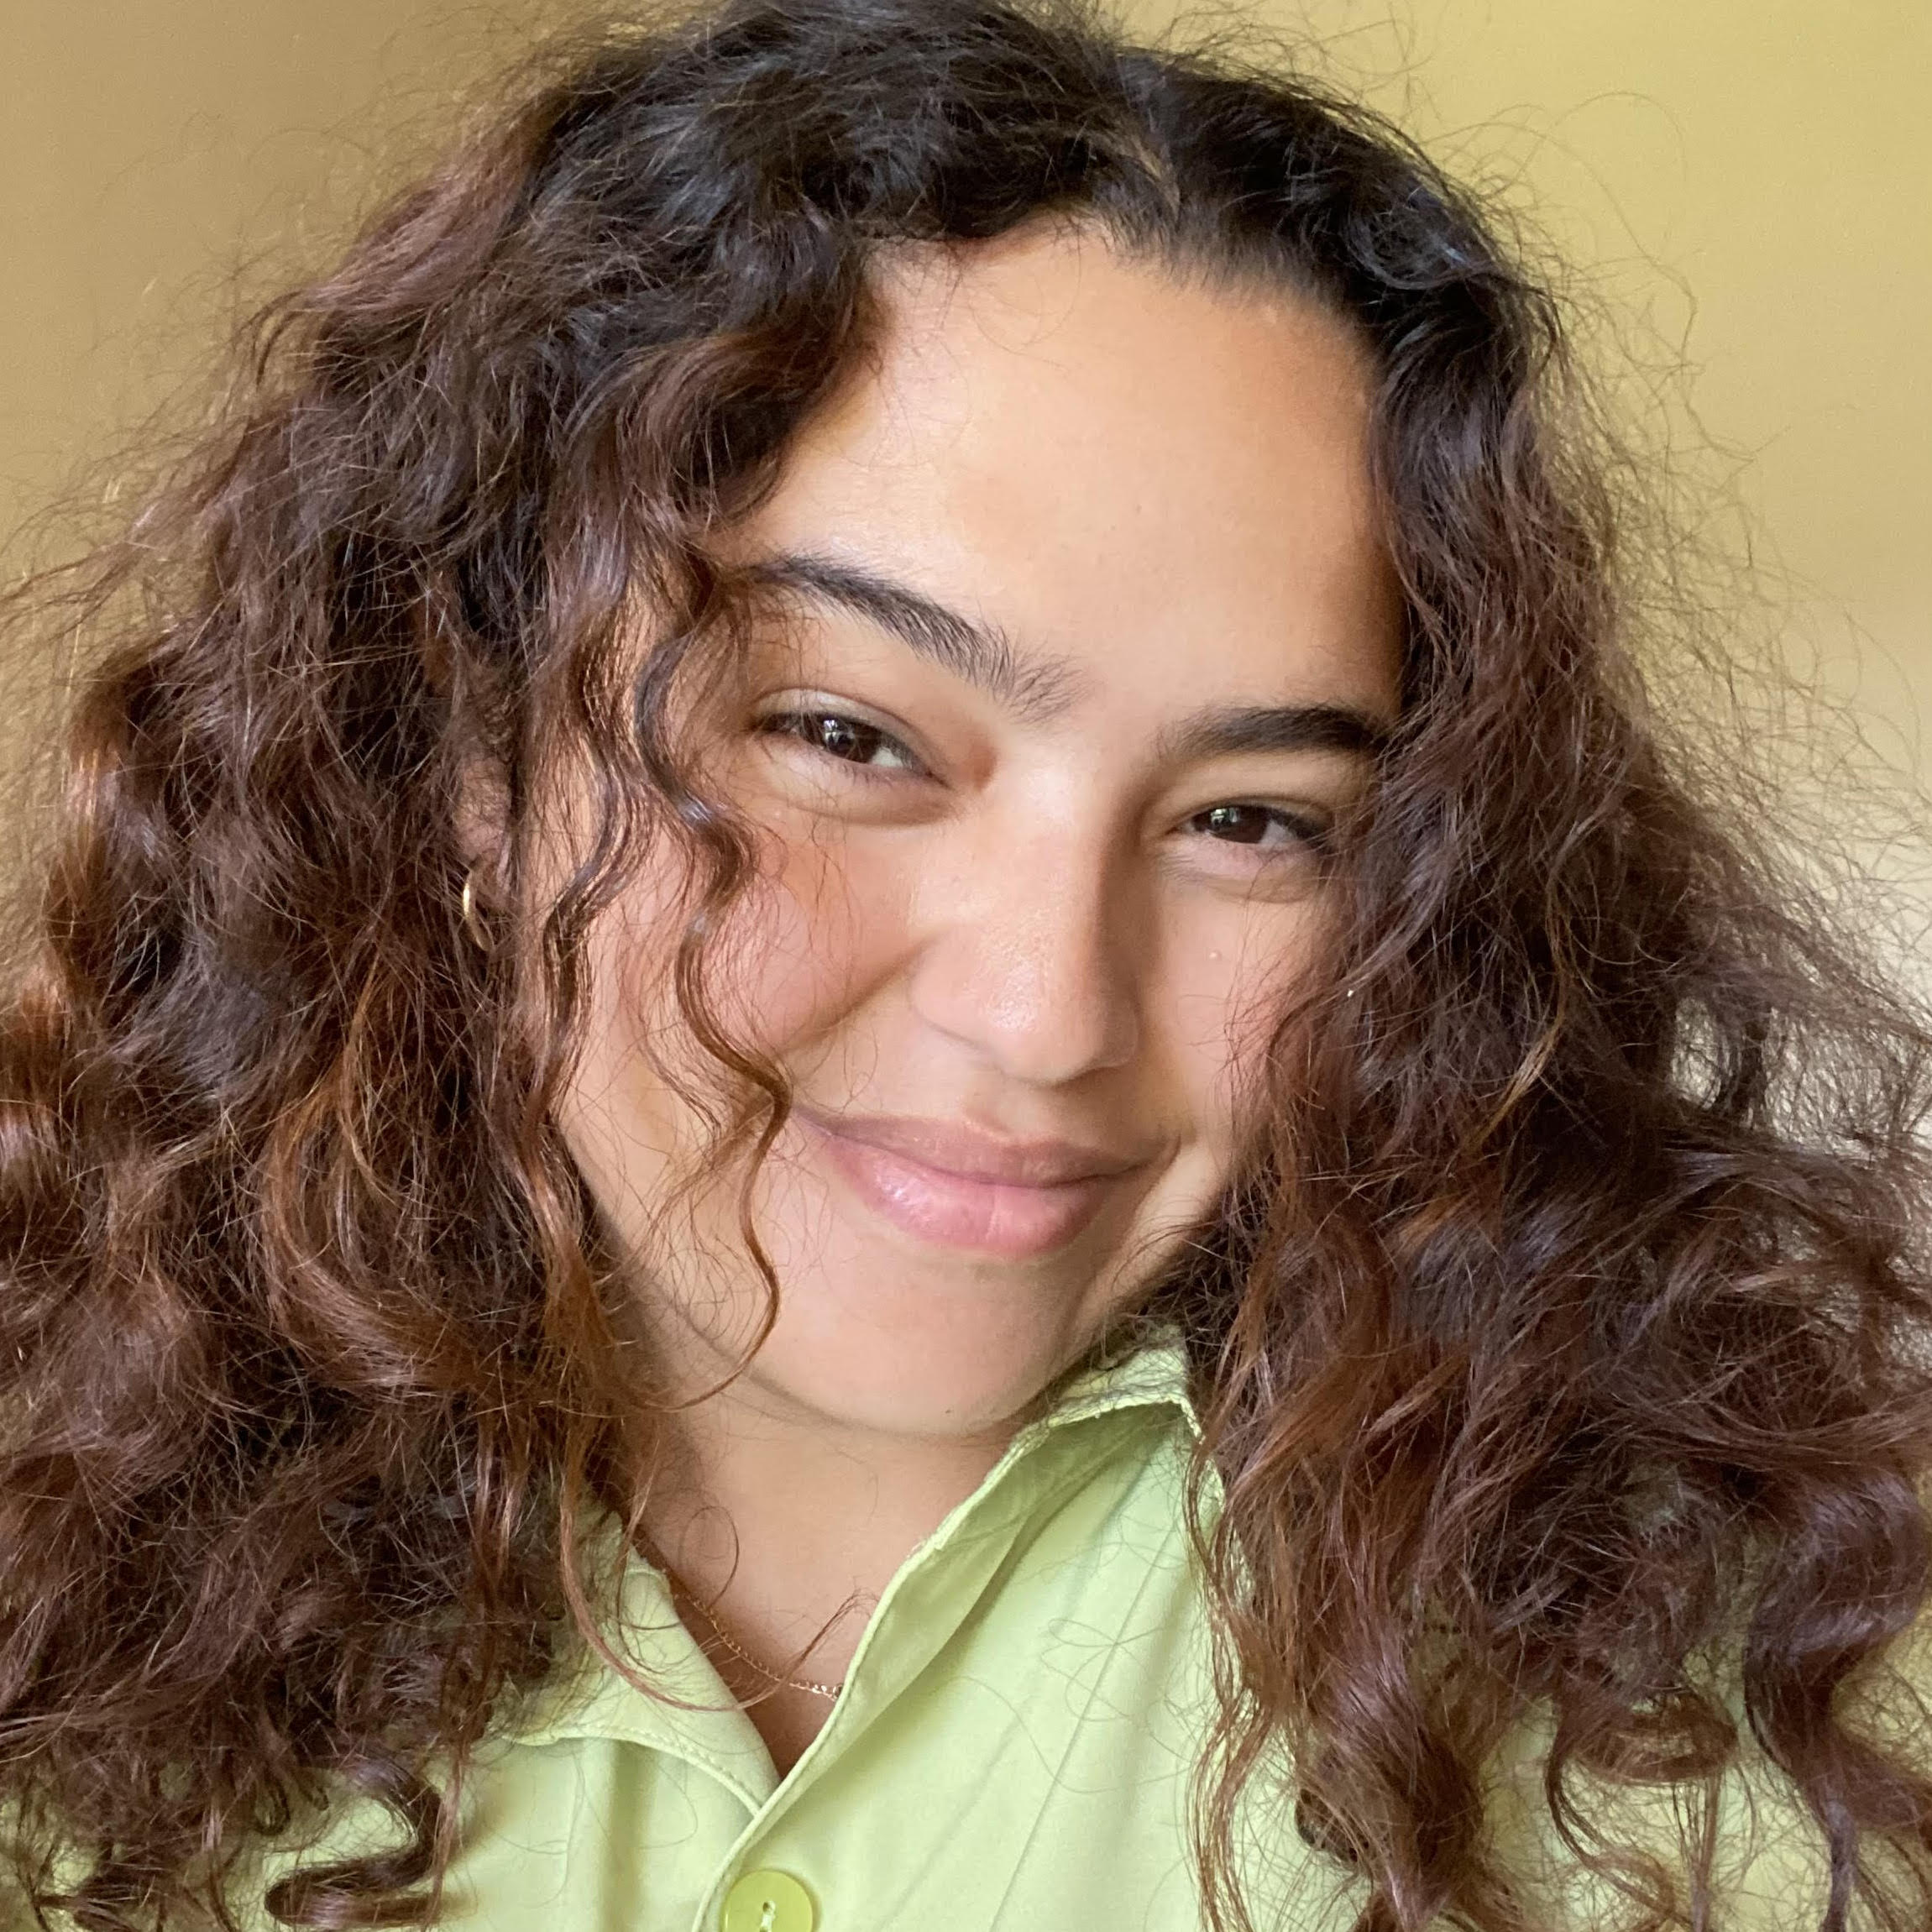 Israa - A woman with curly hair smiling in a green shirt.